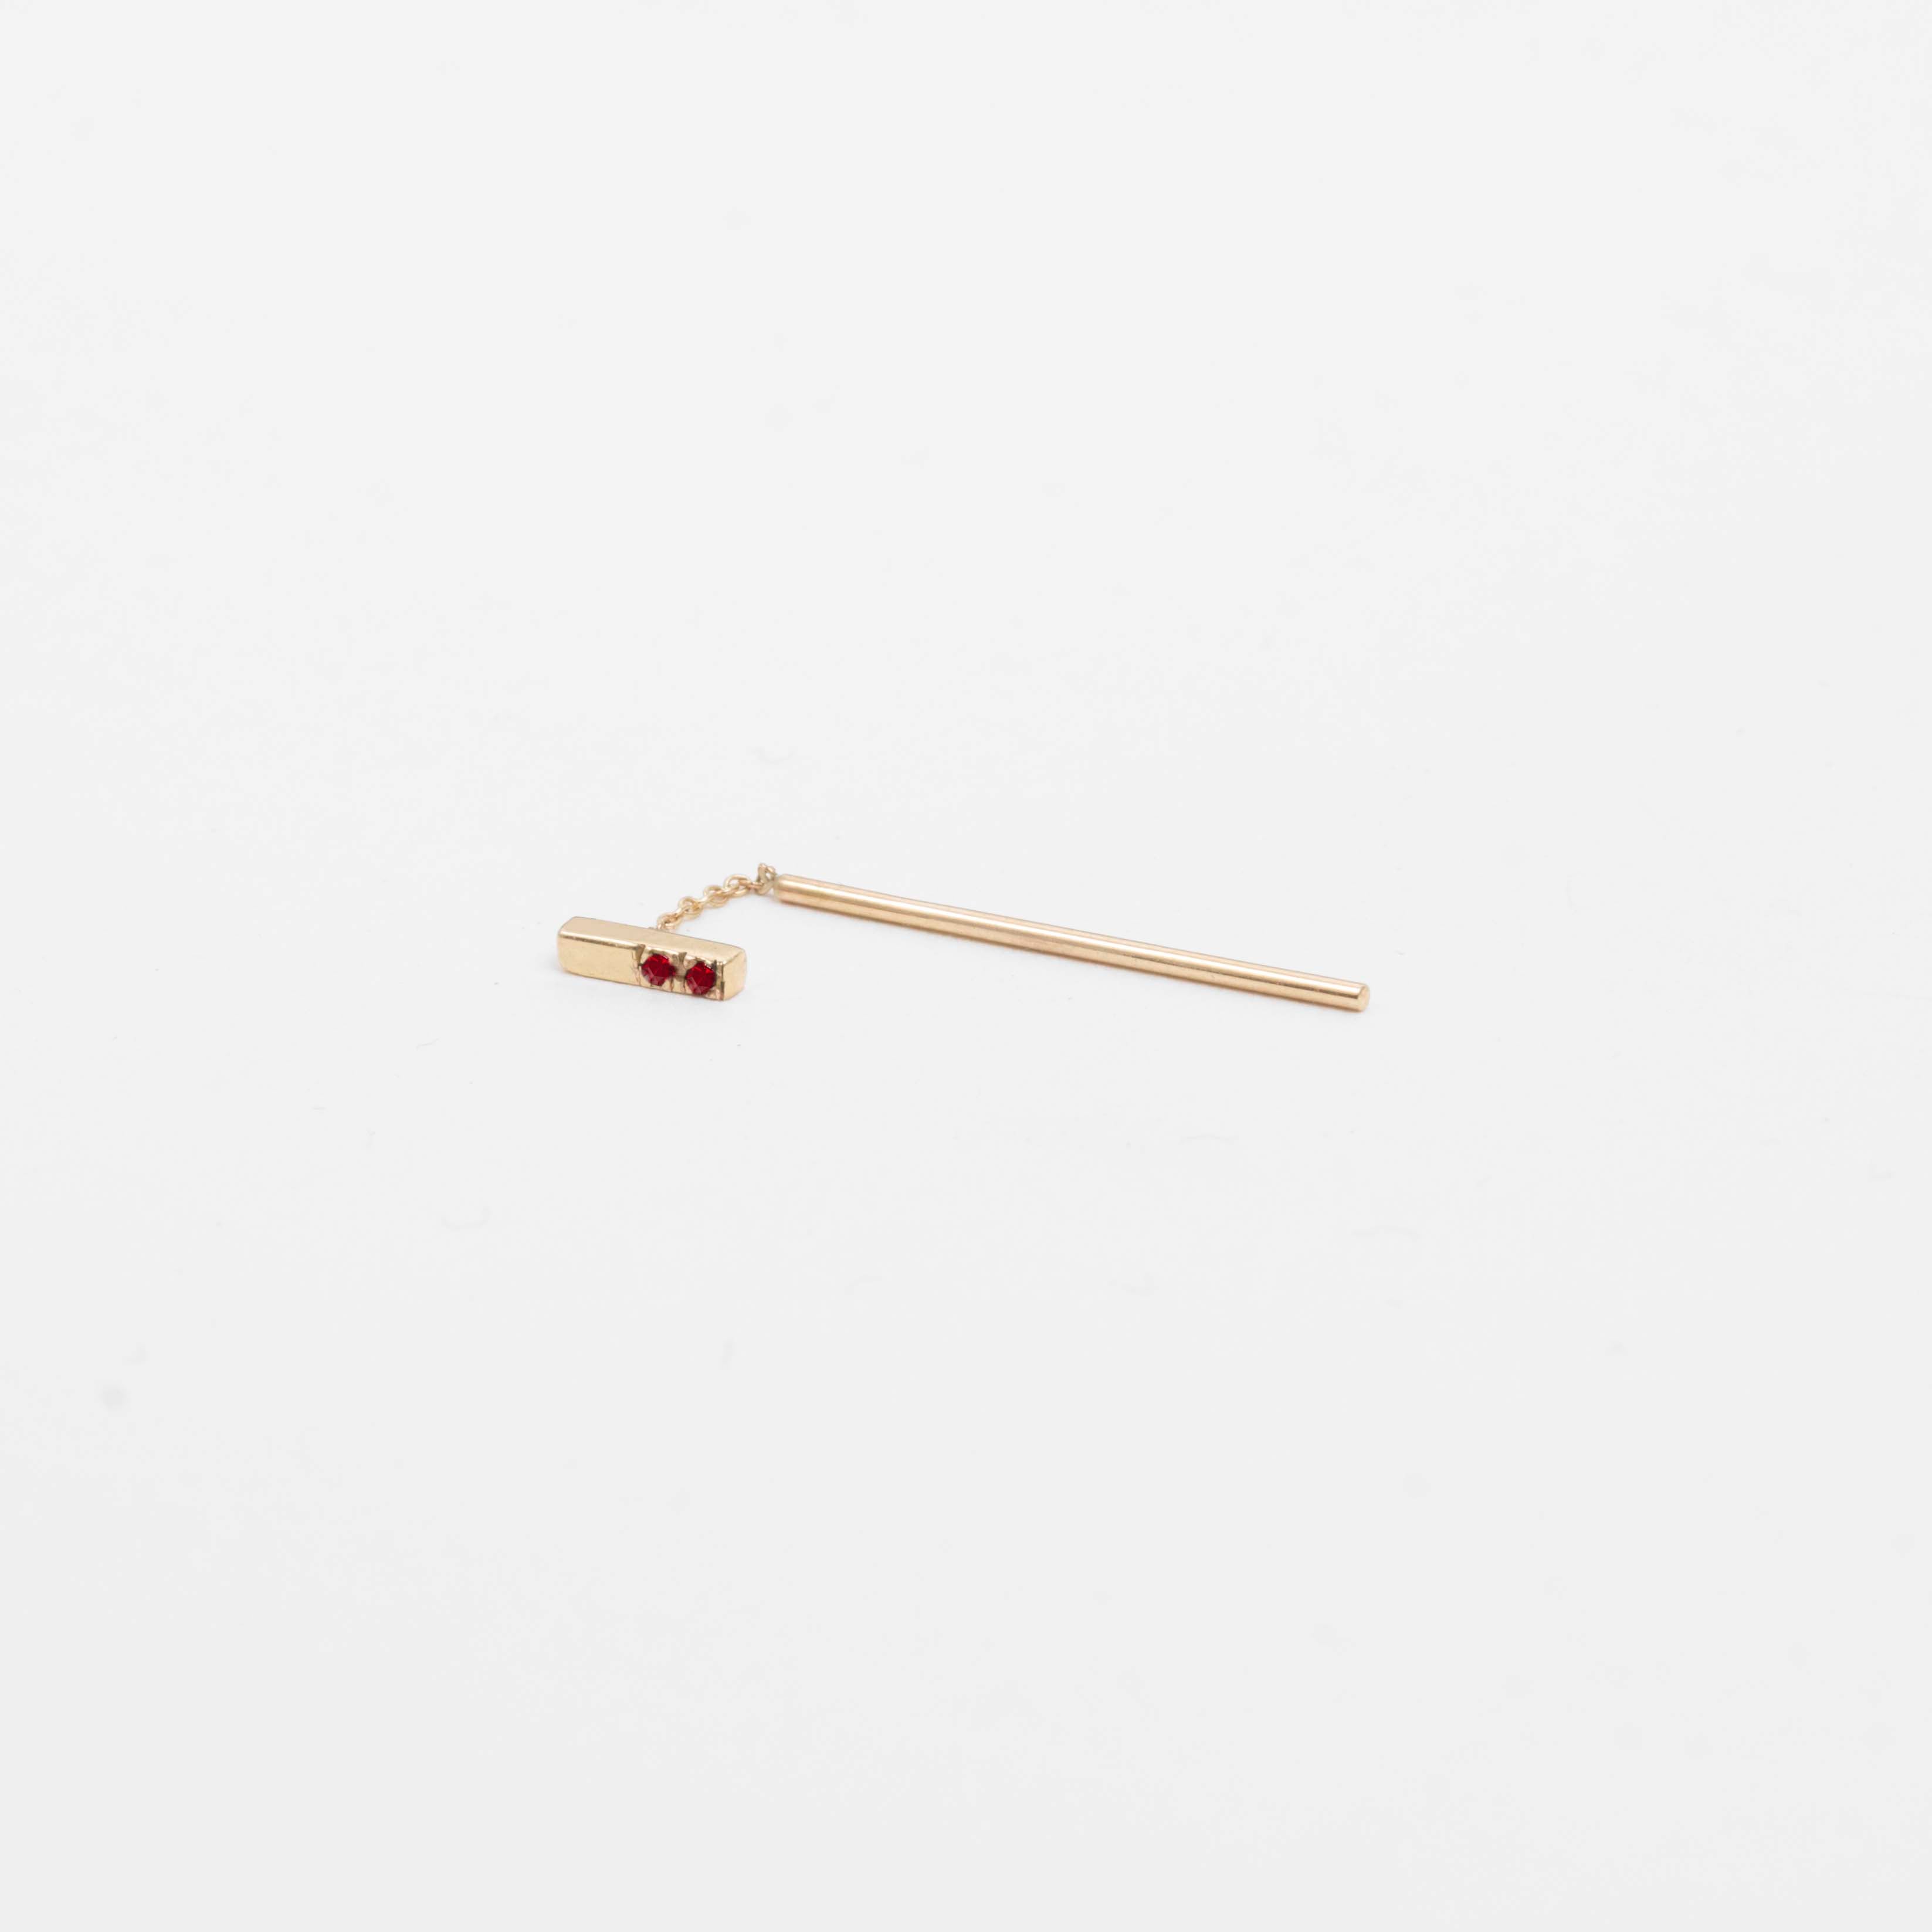 Olko Short Simple Pull Through Earring 14k Gold set with Ruby By SHW Fine Jewelry New York City